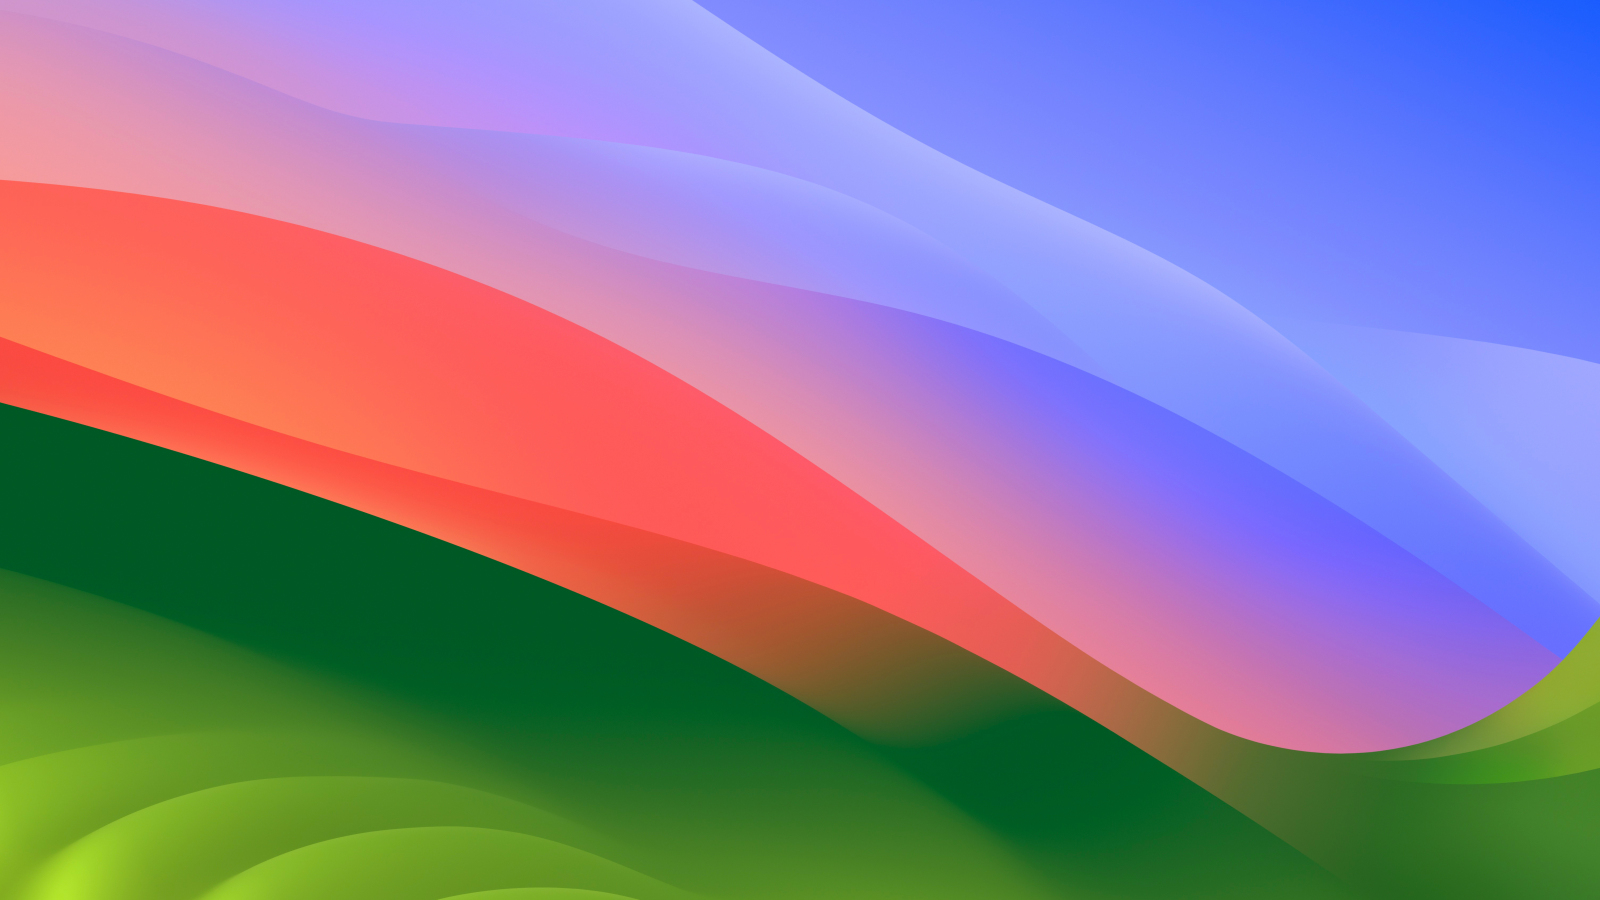 MacOS Sonoma, colorful waves, stock photo, 1600x900 wallpaper